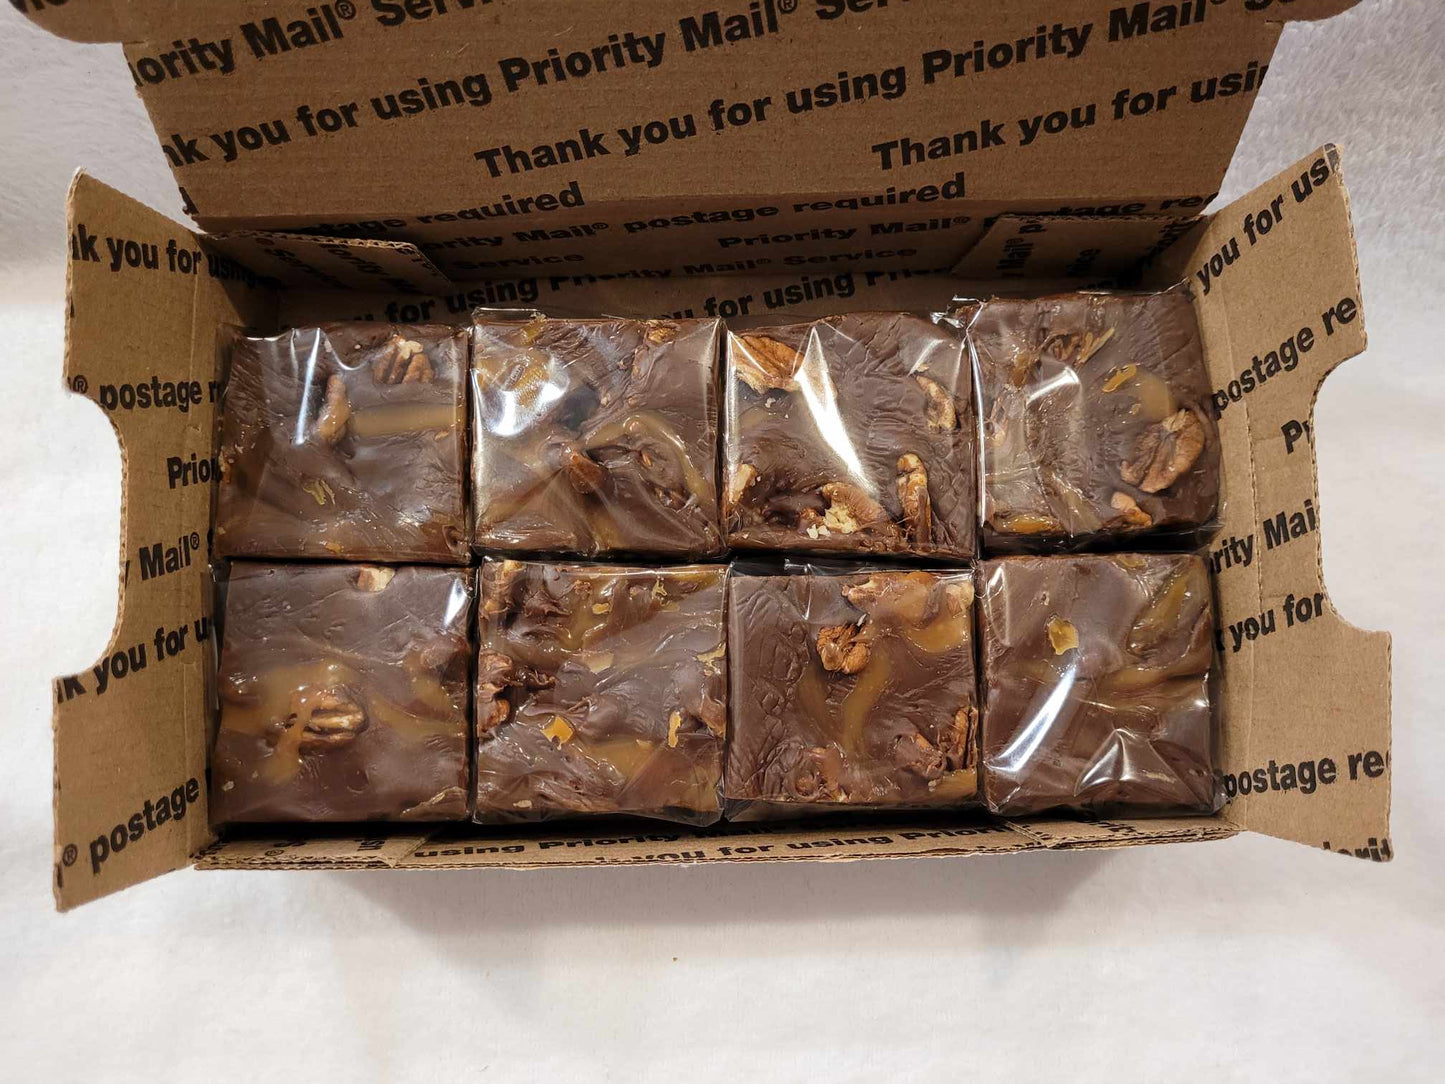 Turtle Fudge - (rich chocolate, lots of caramel, and pecans)